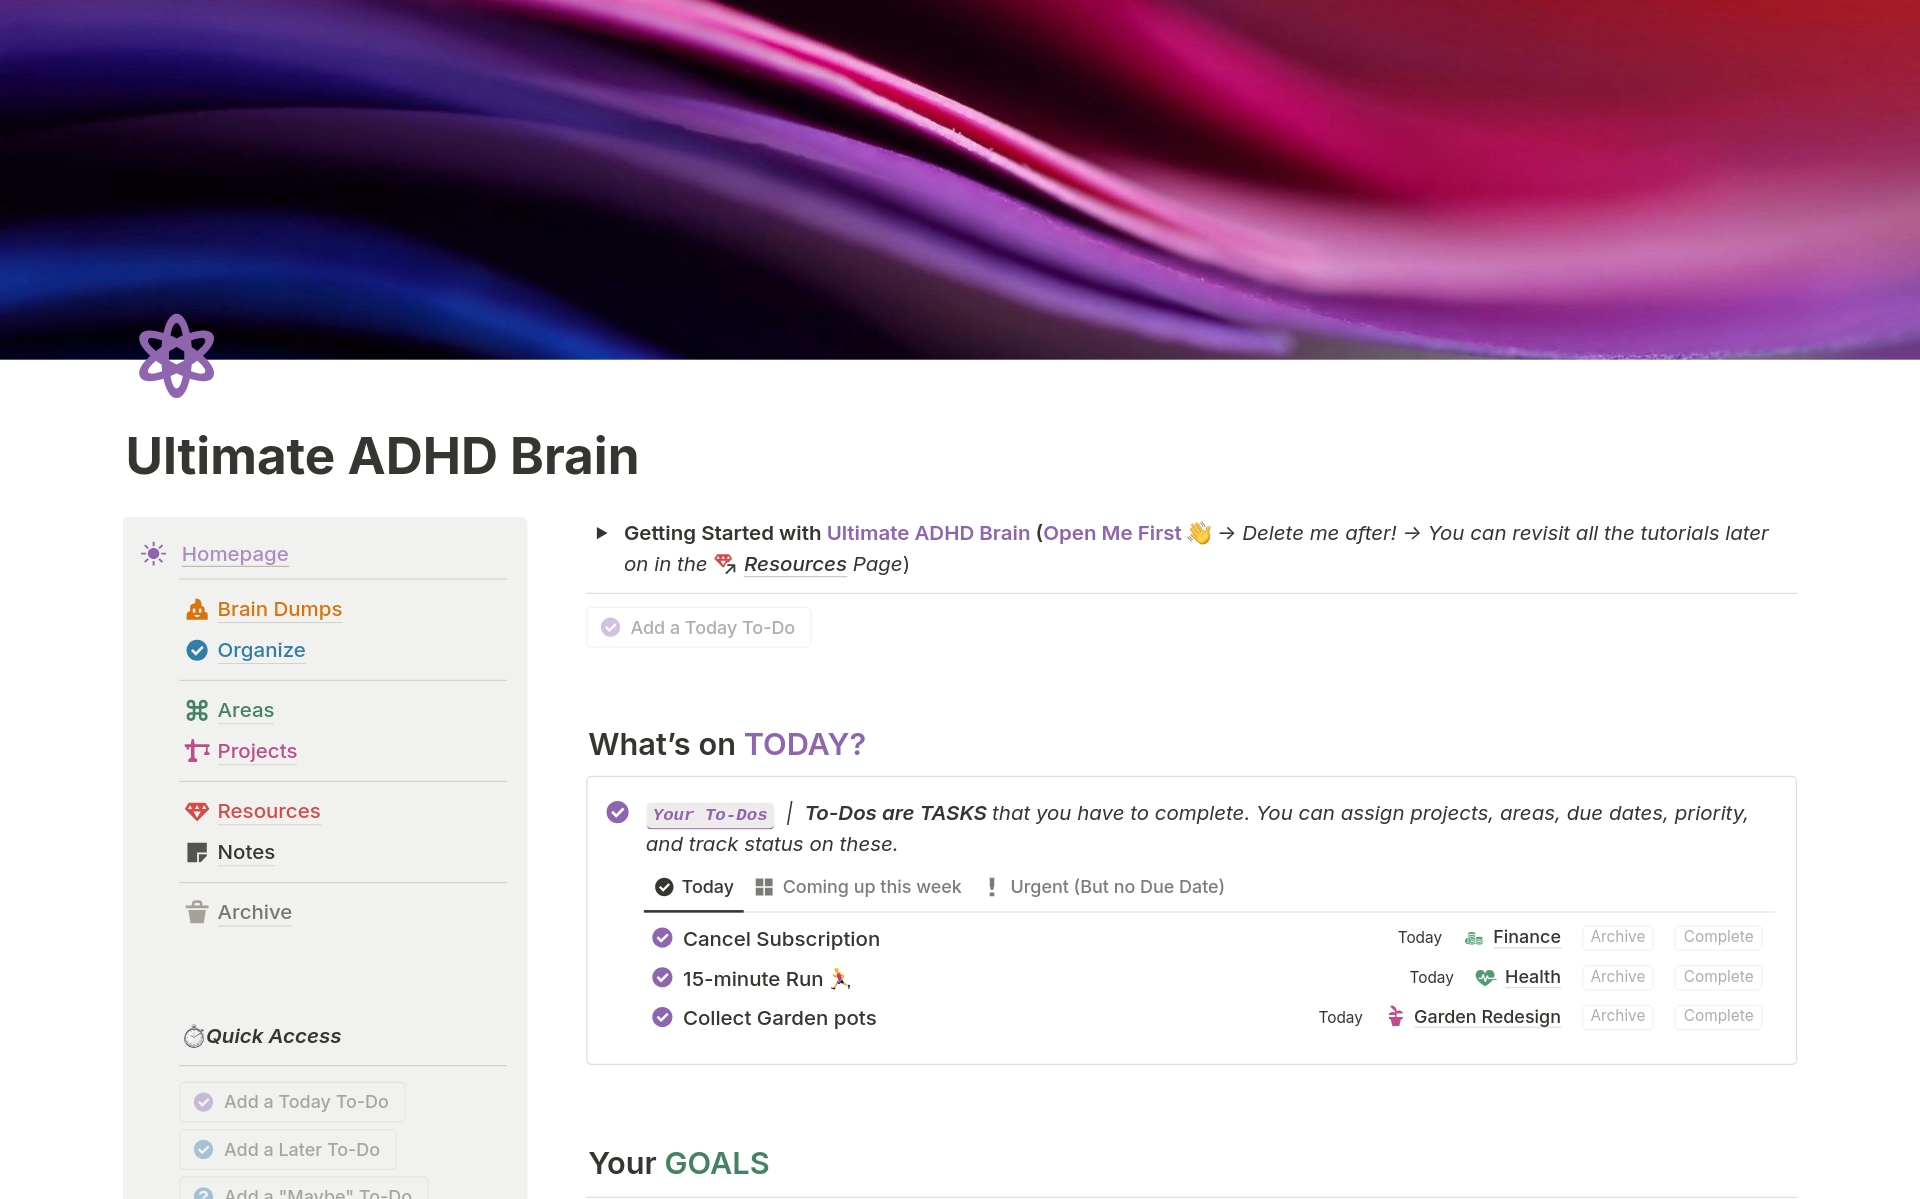 The Ultimate ADHD Brain is the first all-in-one life management system built around and scientifically designed specifically for the ADHD brain.

If you're struggling with your ADHD, and don't know how to take back control, this template has the potential to change your life.